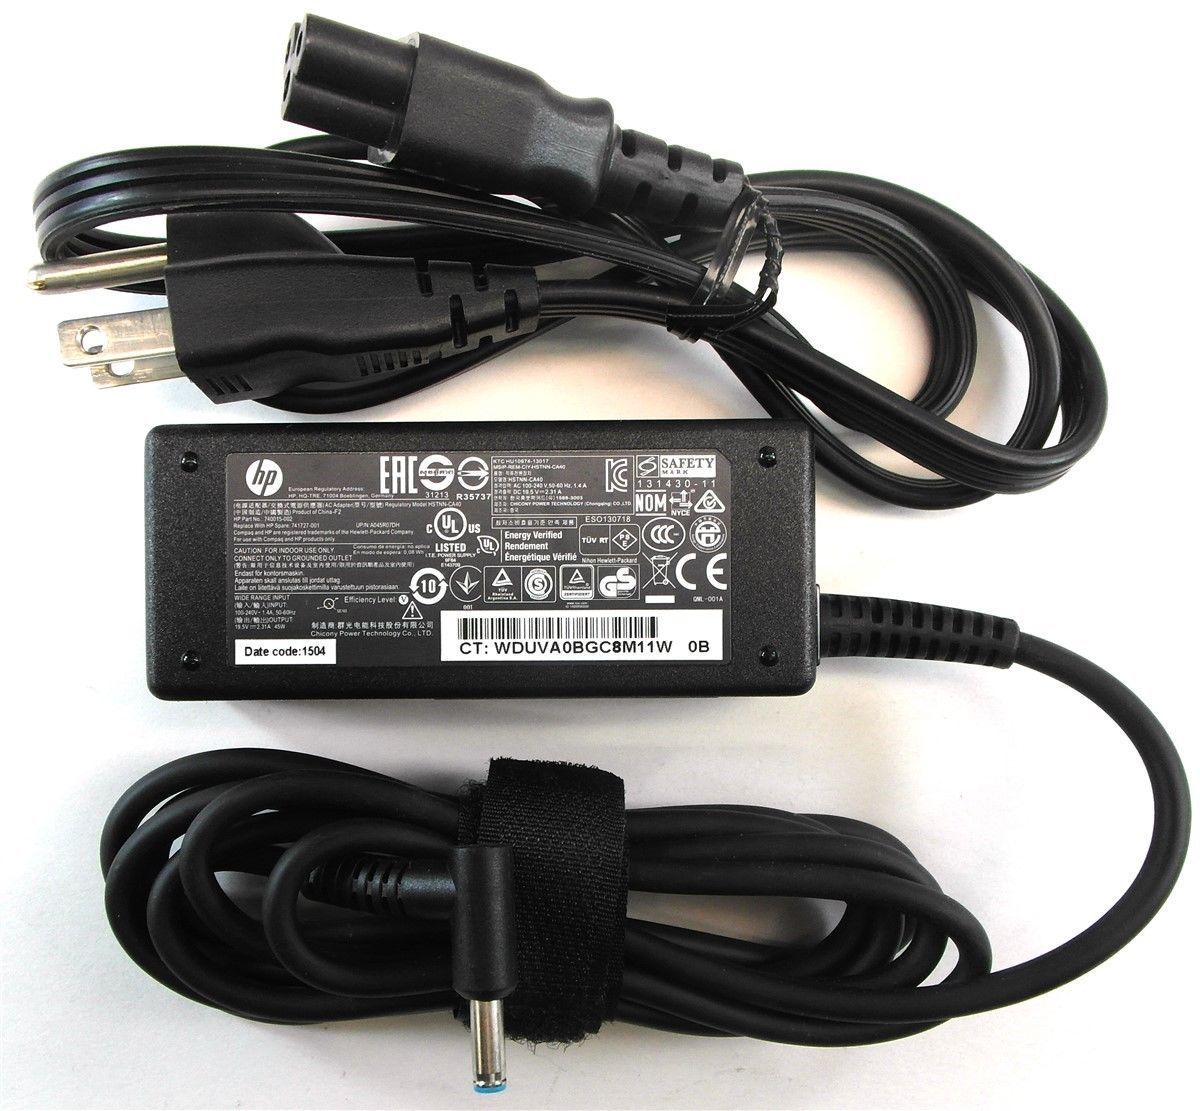 HP f4h29lar AC Adapter Power Supply Cord Cable Charger Genuine Original